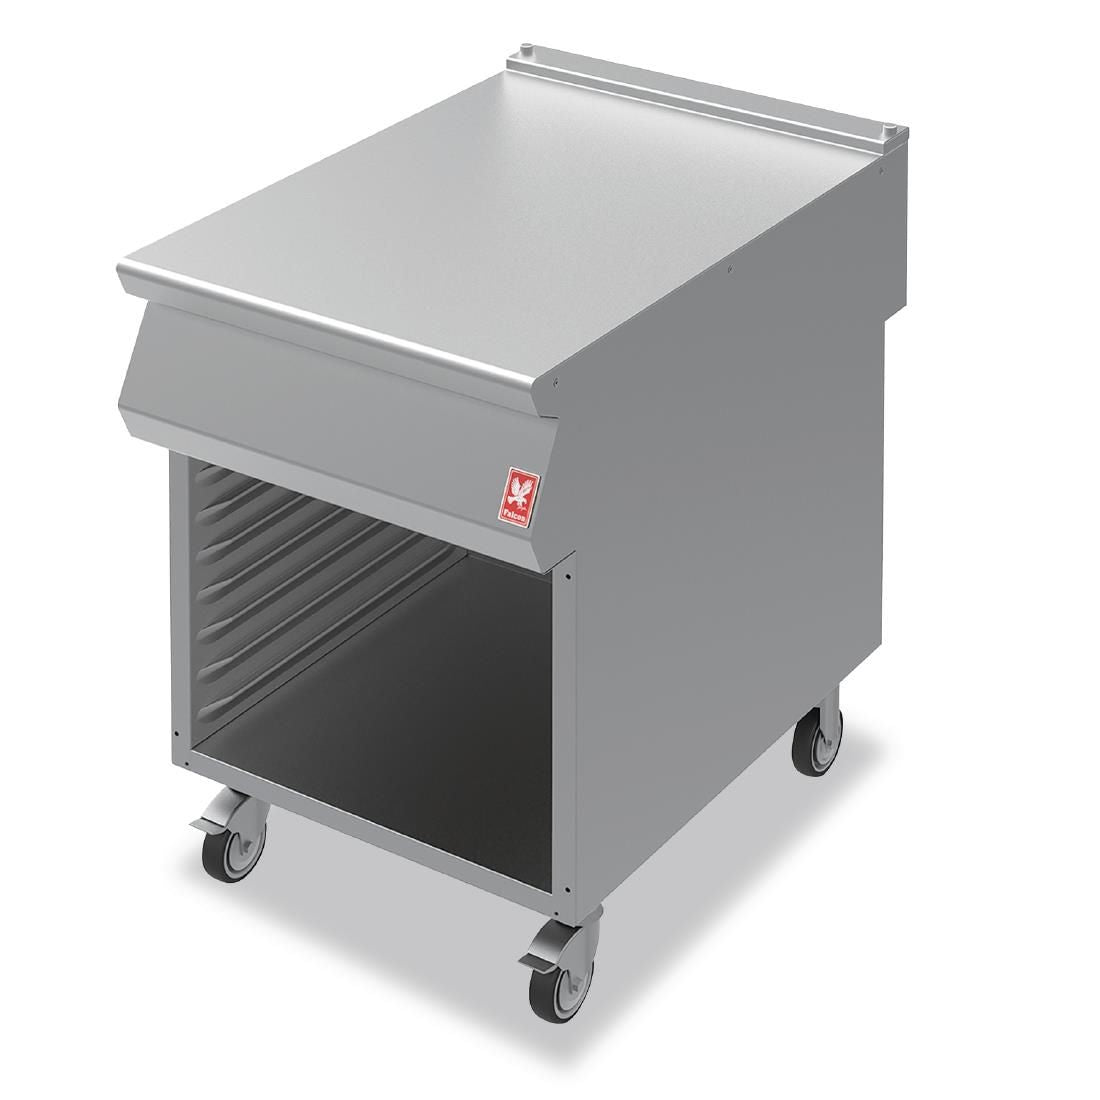 Falcon F900 Open Cabinet With Pressed Runners on Castors N961 JD Catering Equipment Solutions Ltd